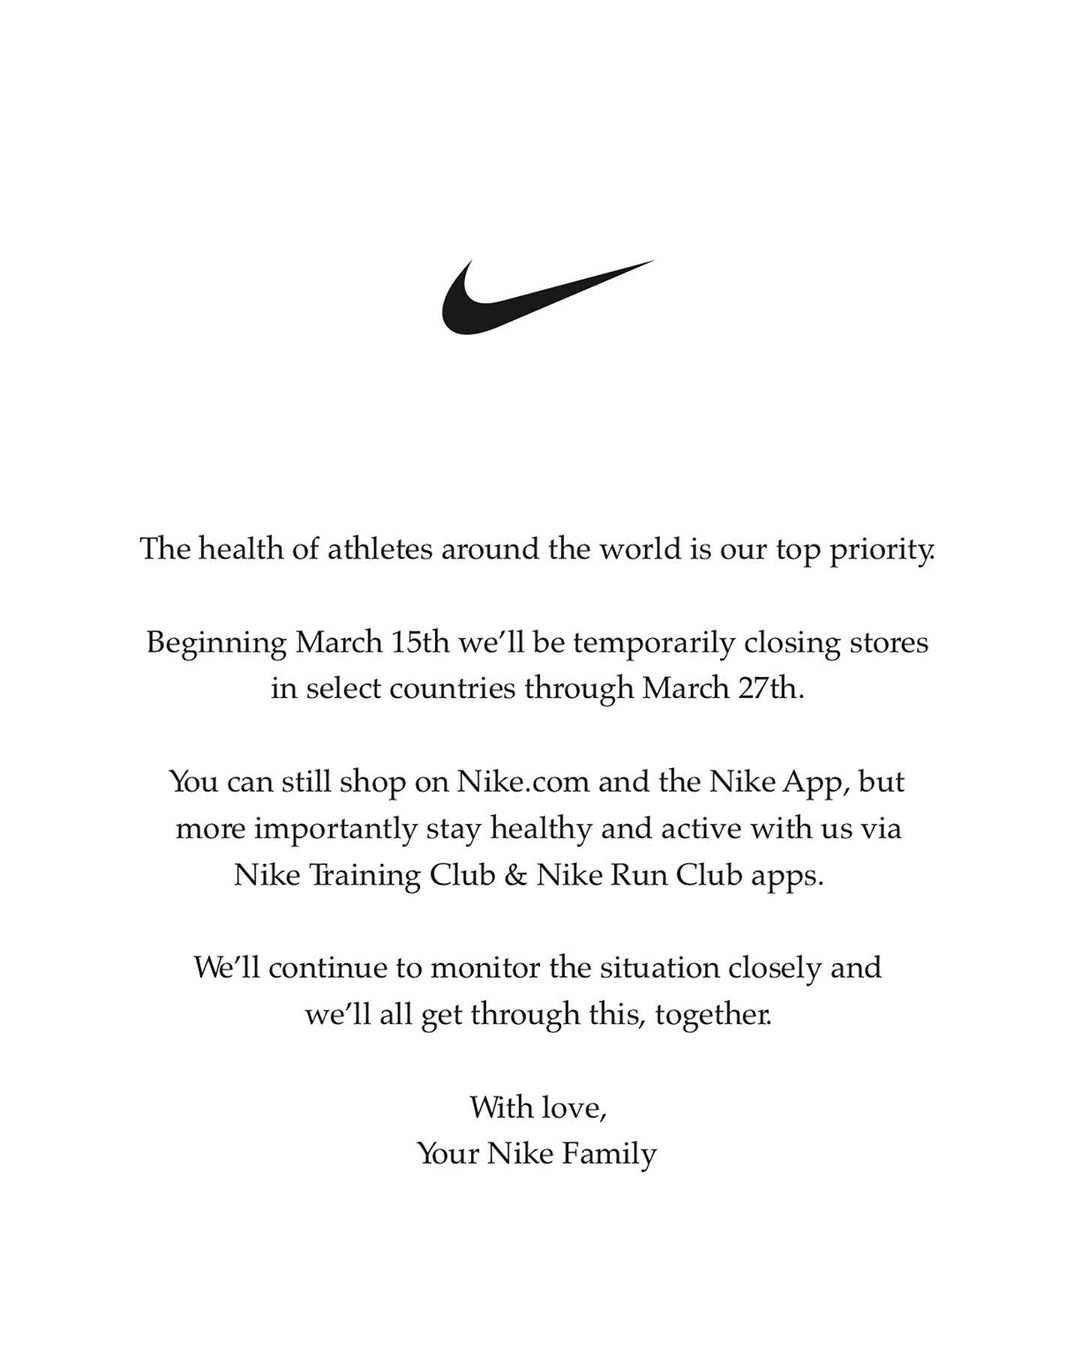 Nike - With love, Your Nike Family